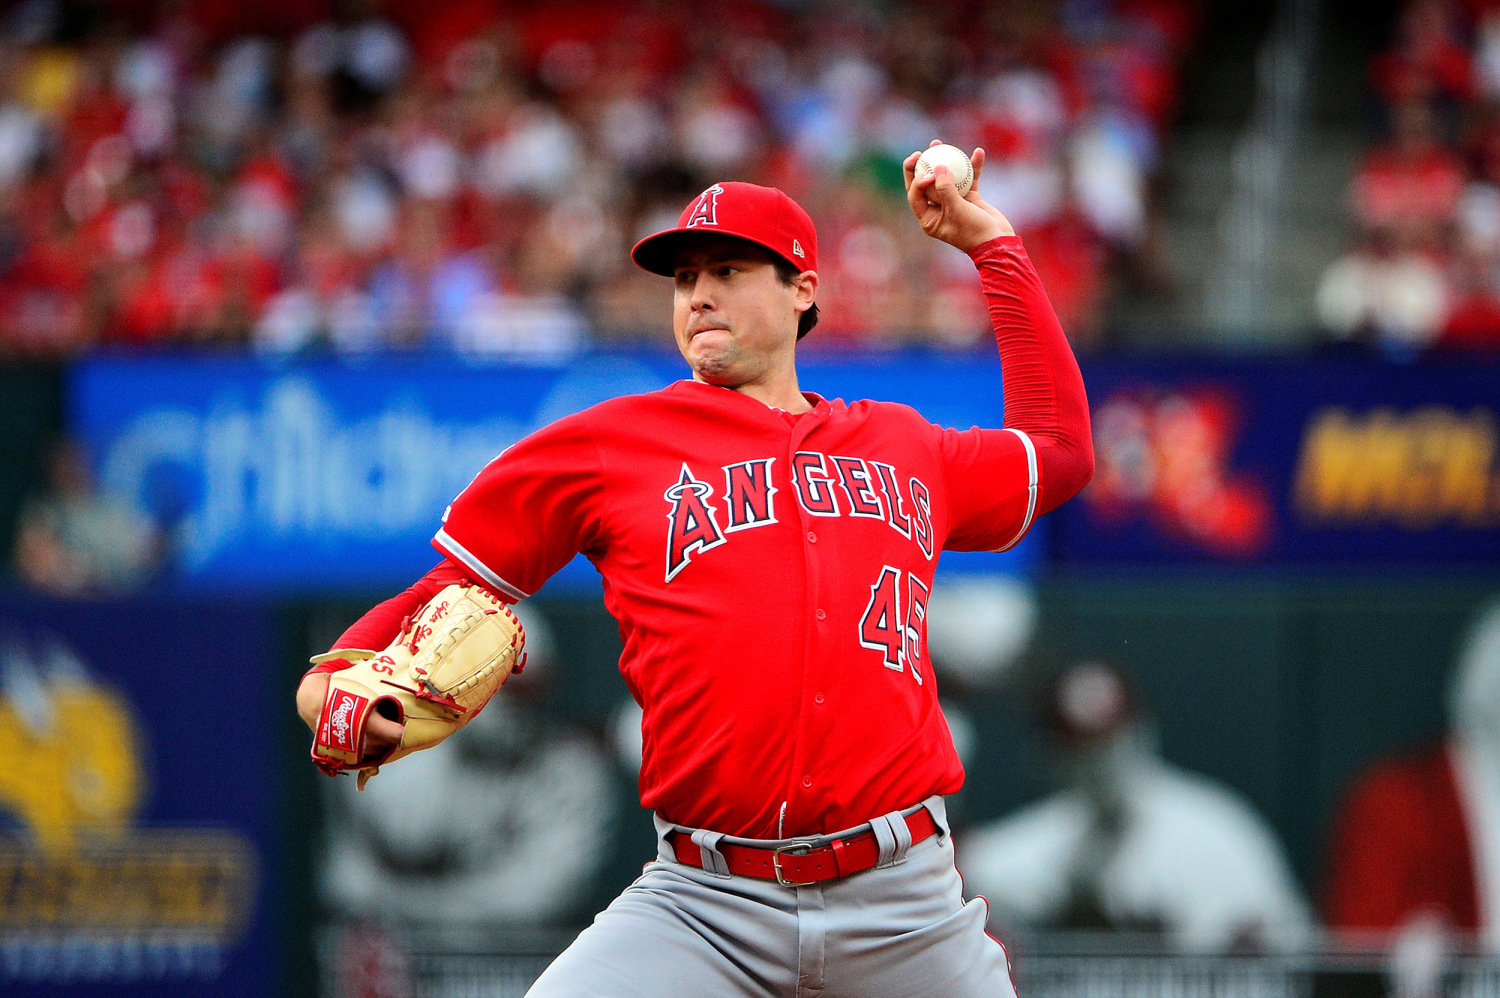 Angels' Mike Trout was 'shocked' to learn cause of Tyler Skaggs' death